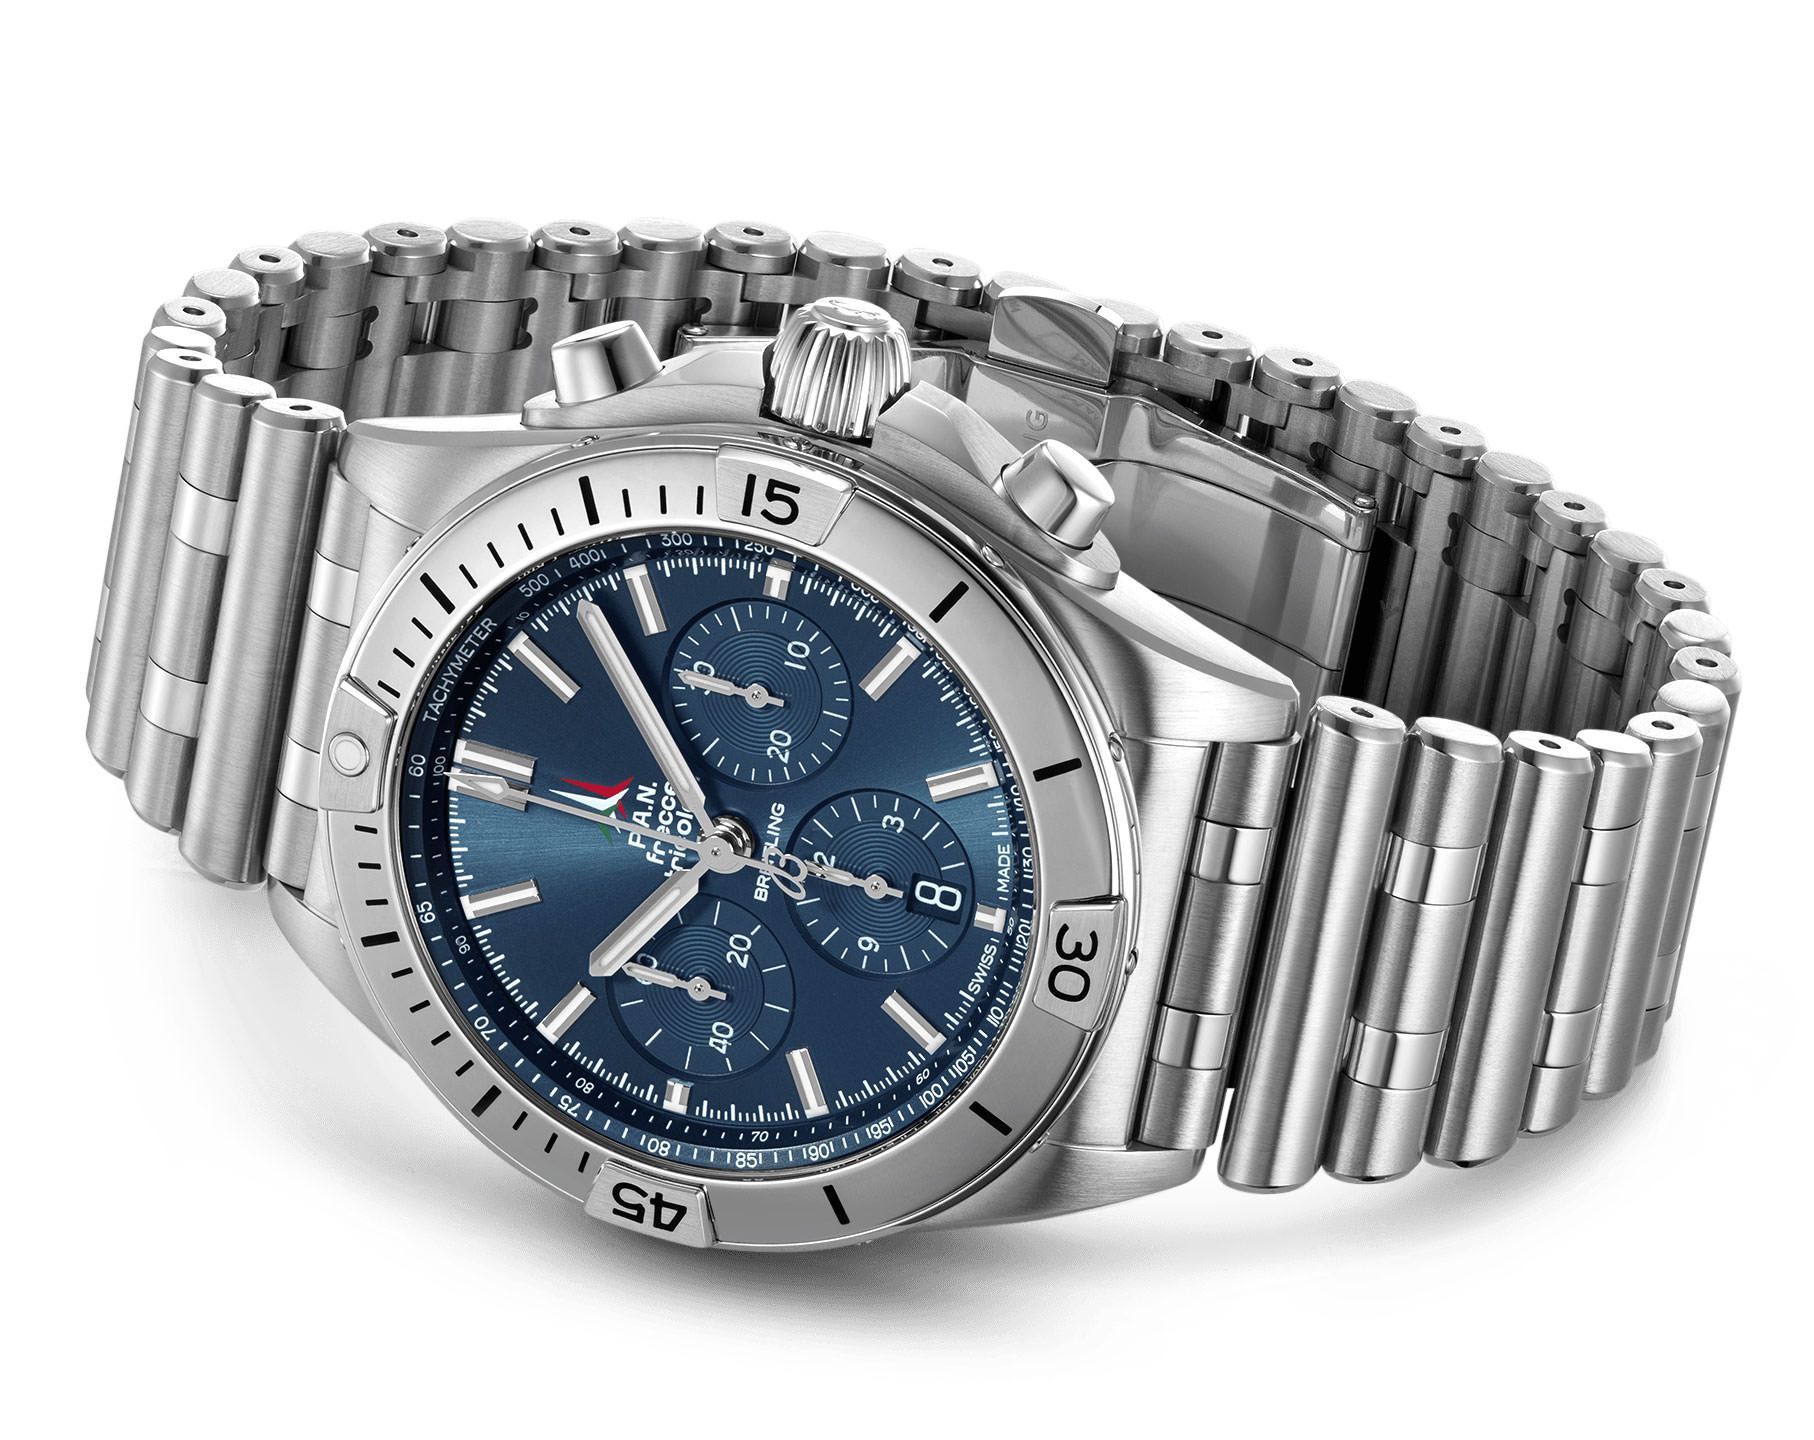 Breitling  42 mm Watch in Blue Dial For Men - 3